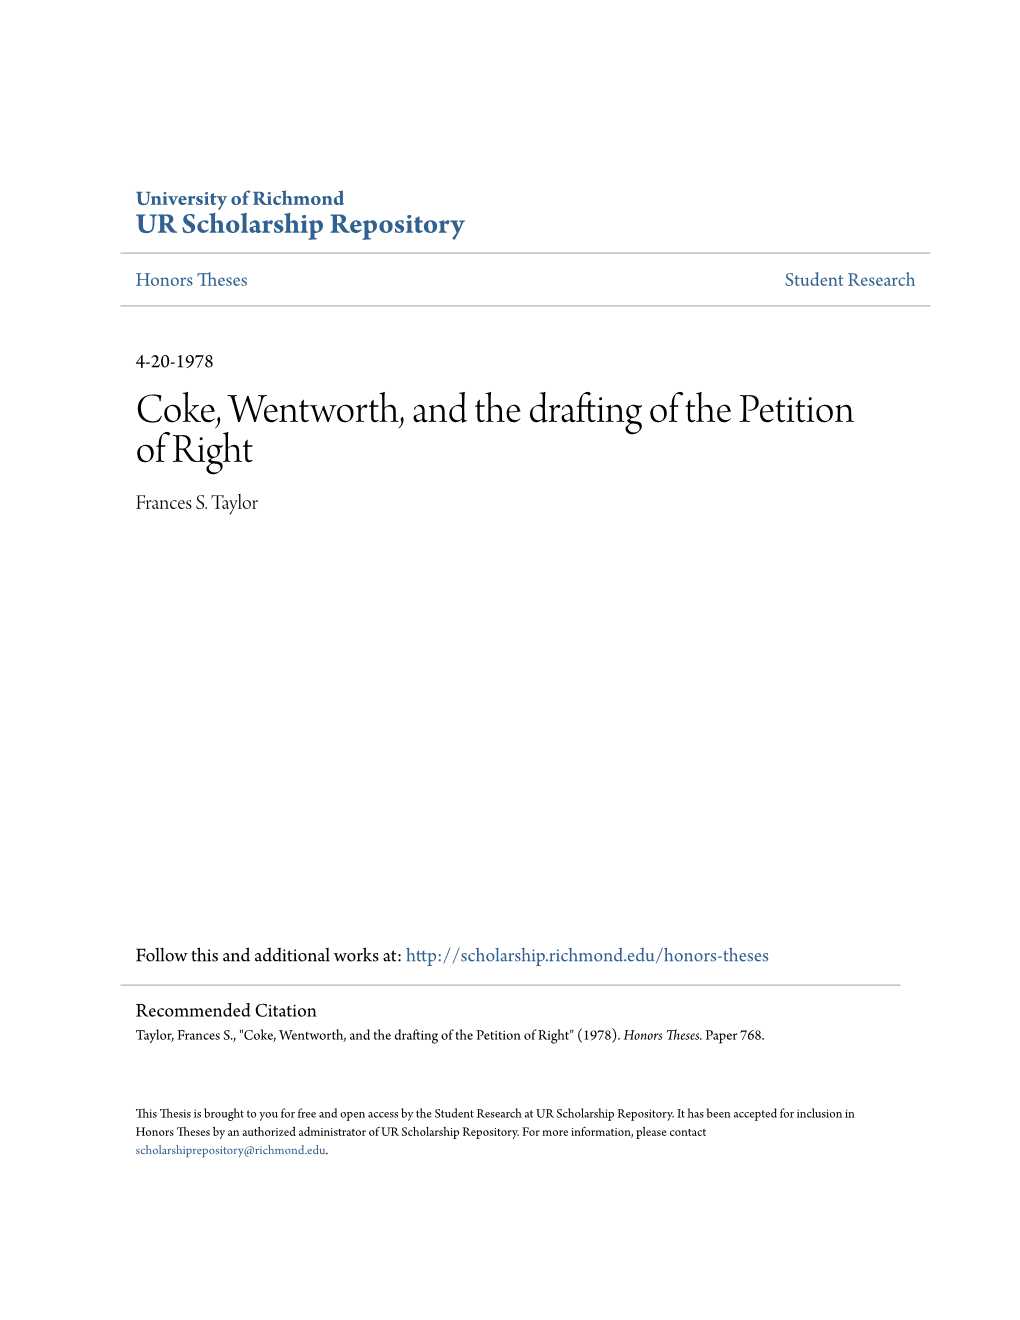 Coke, Wentworth, and the Drafting of the Petition of Right Frances S